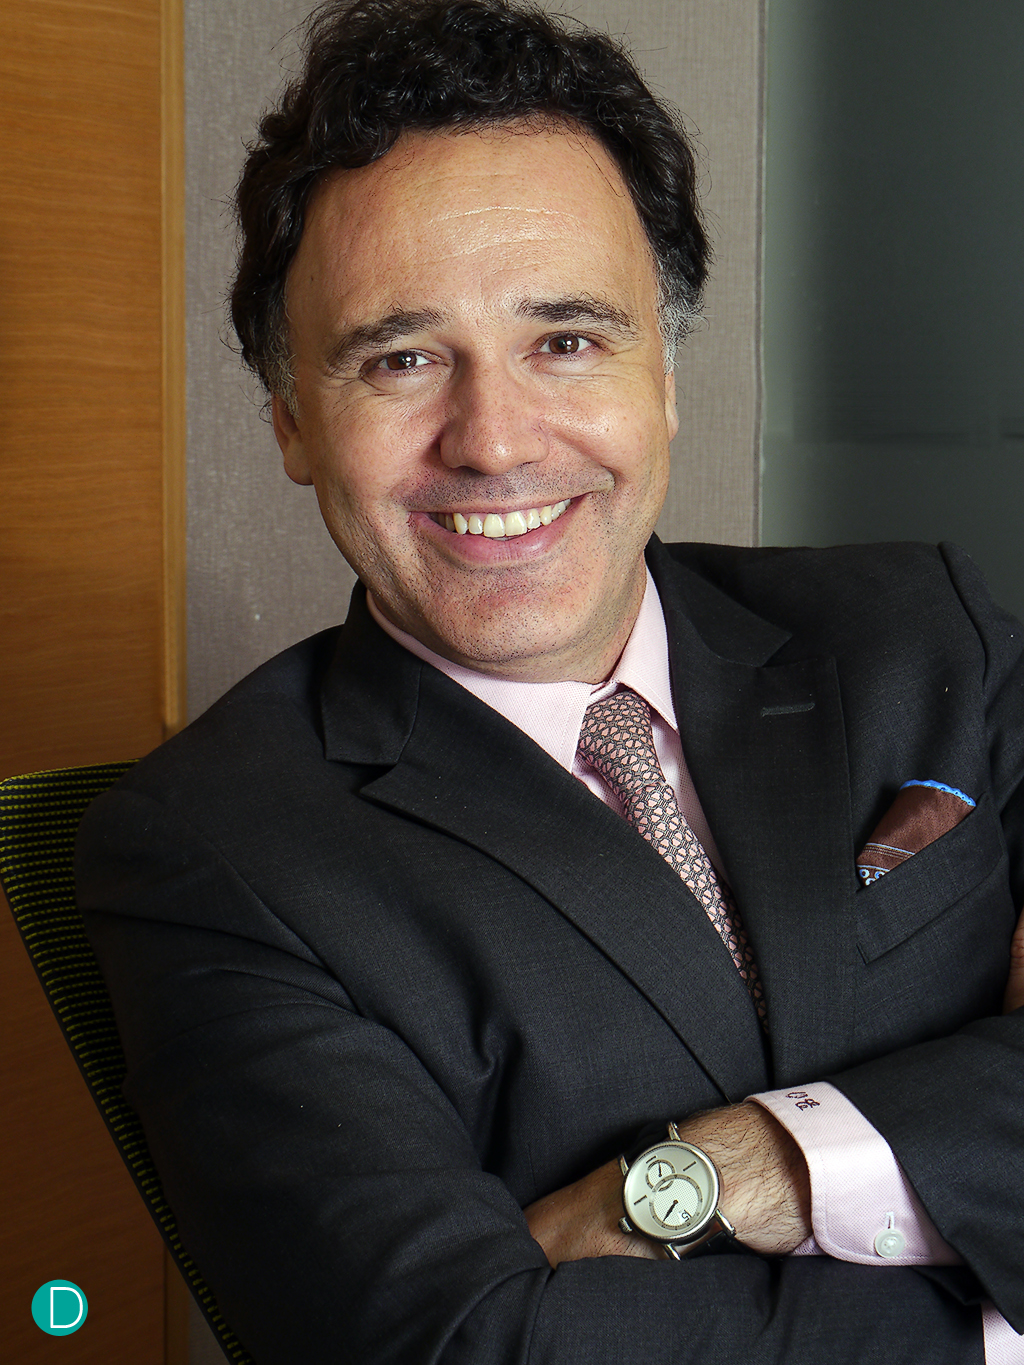 Oliver Ebstein, CEO Chronoswiss. Photo: October 2015.